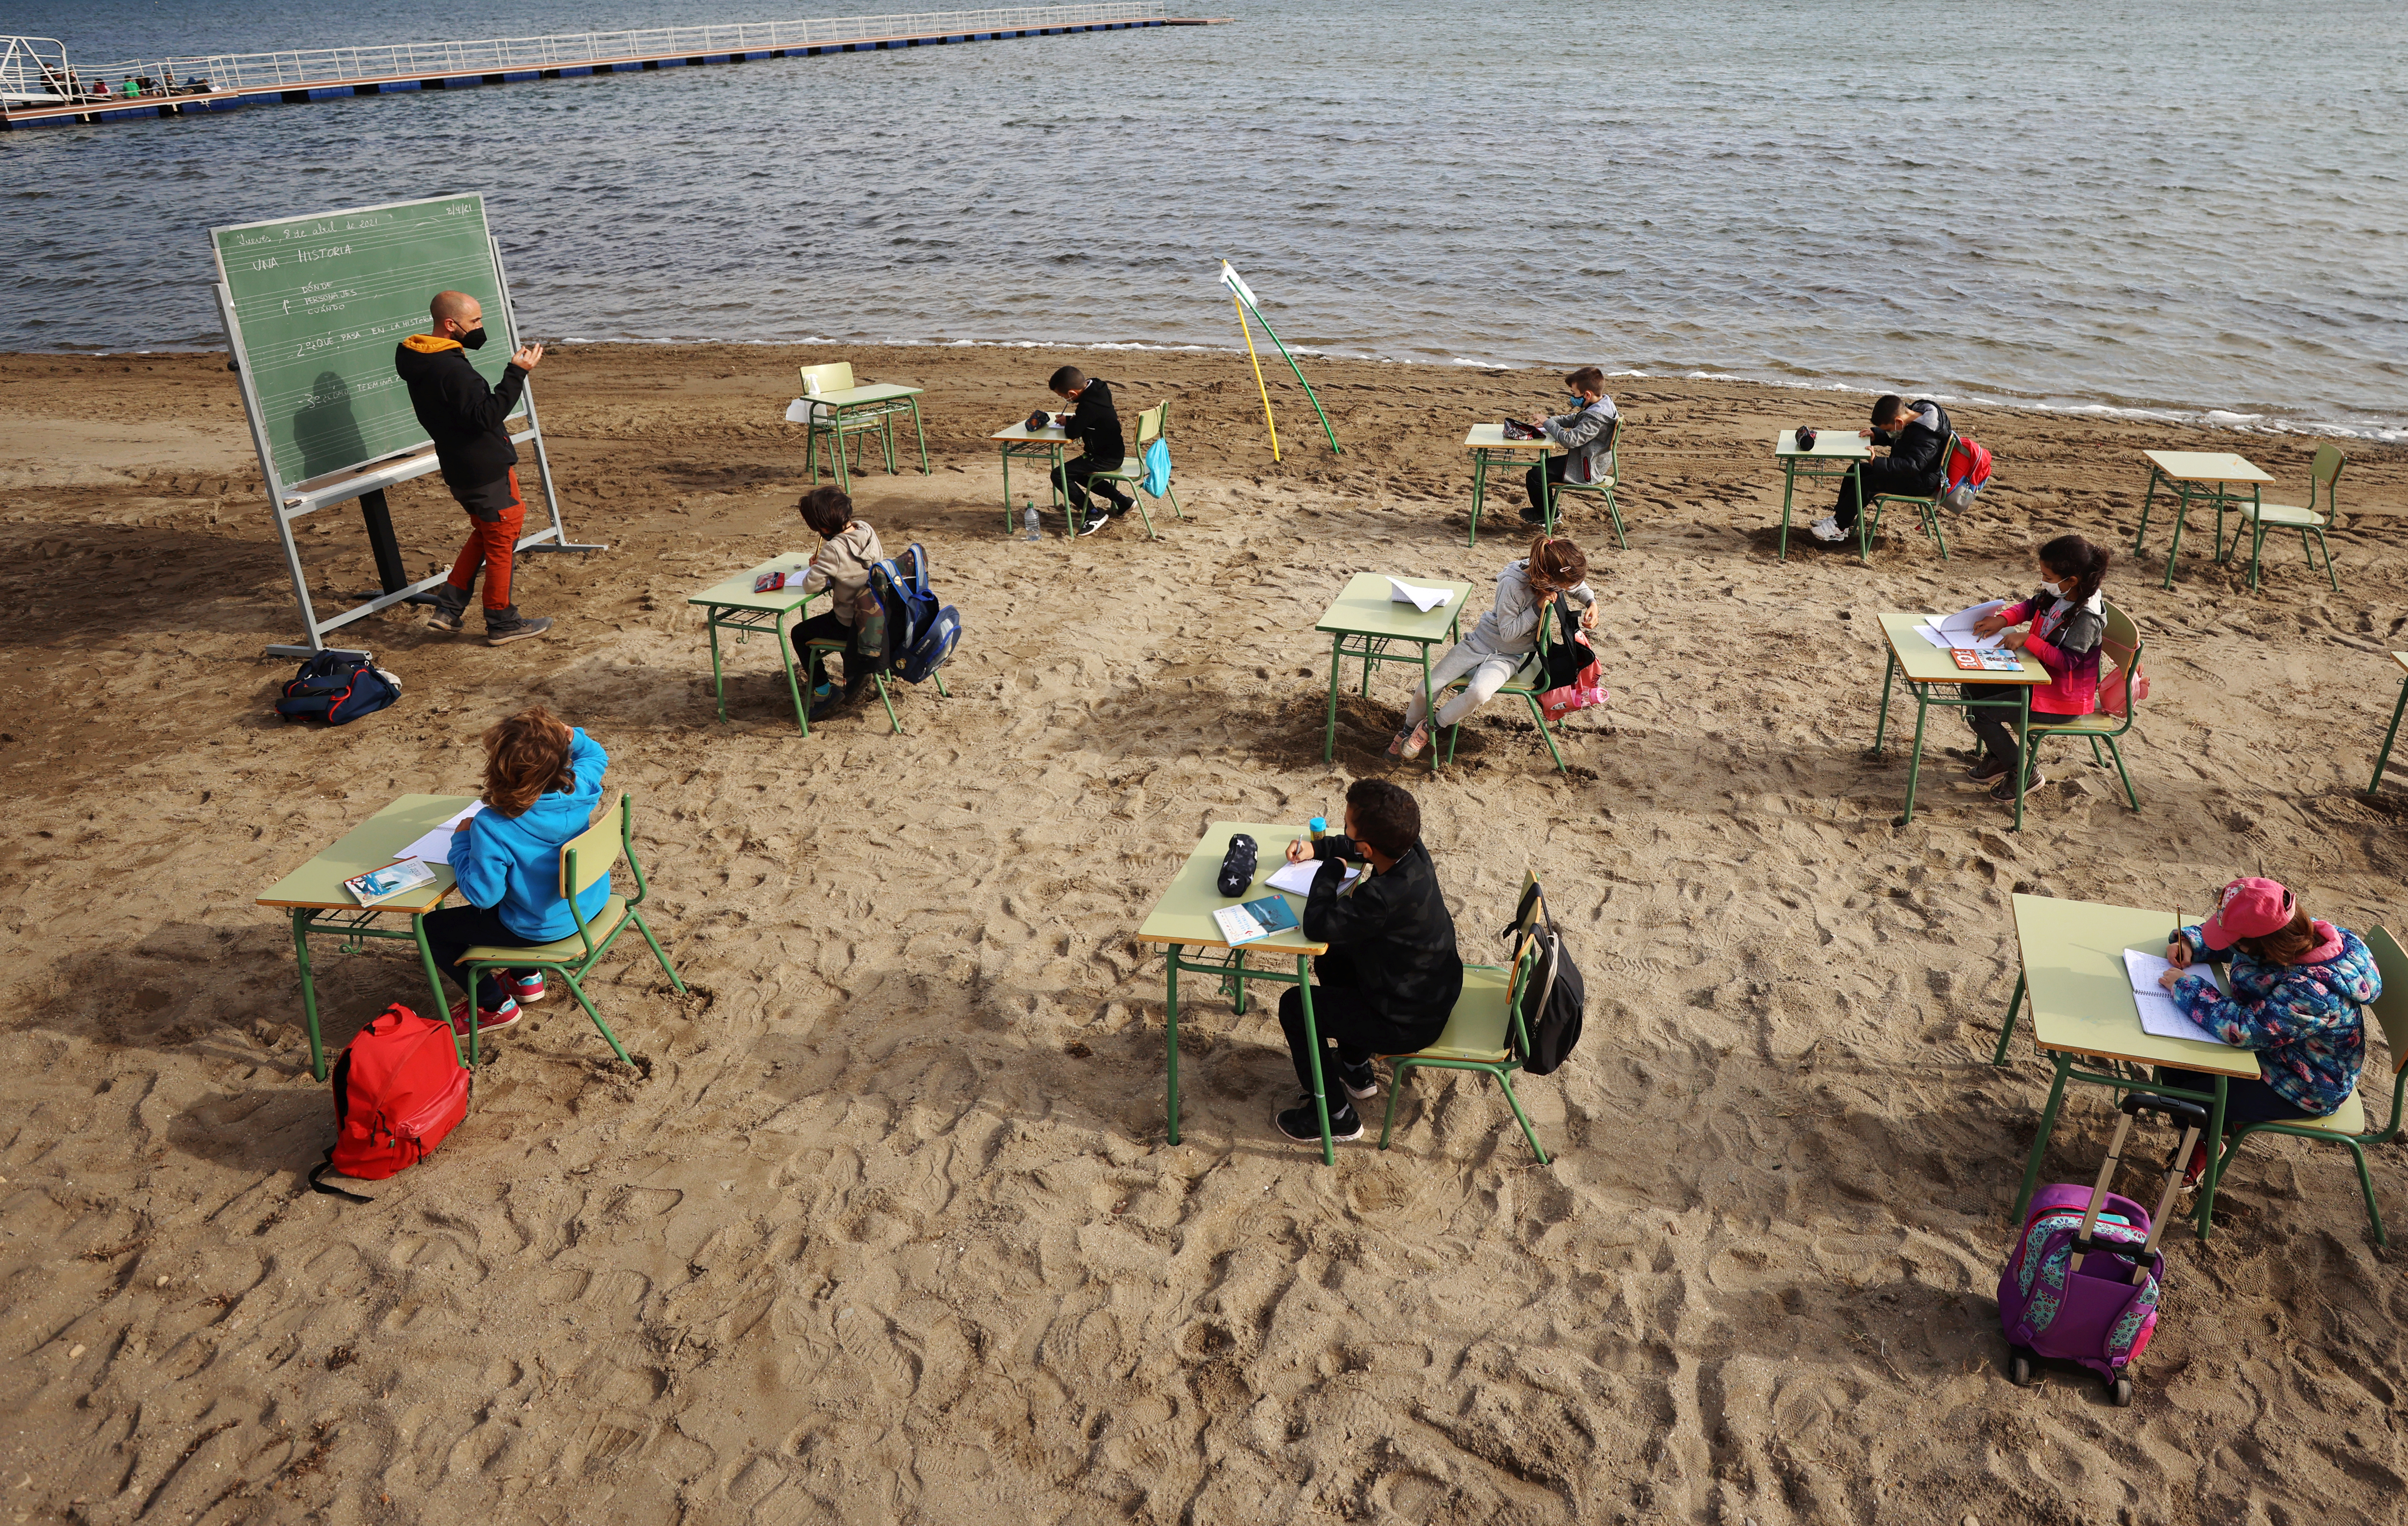 A beach in southern Spain becomes a large outdoor classroom